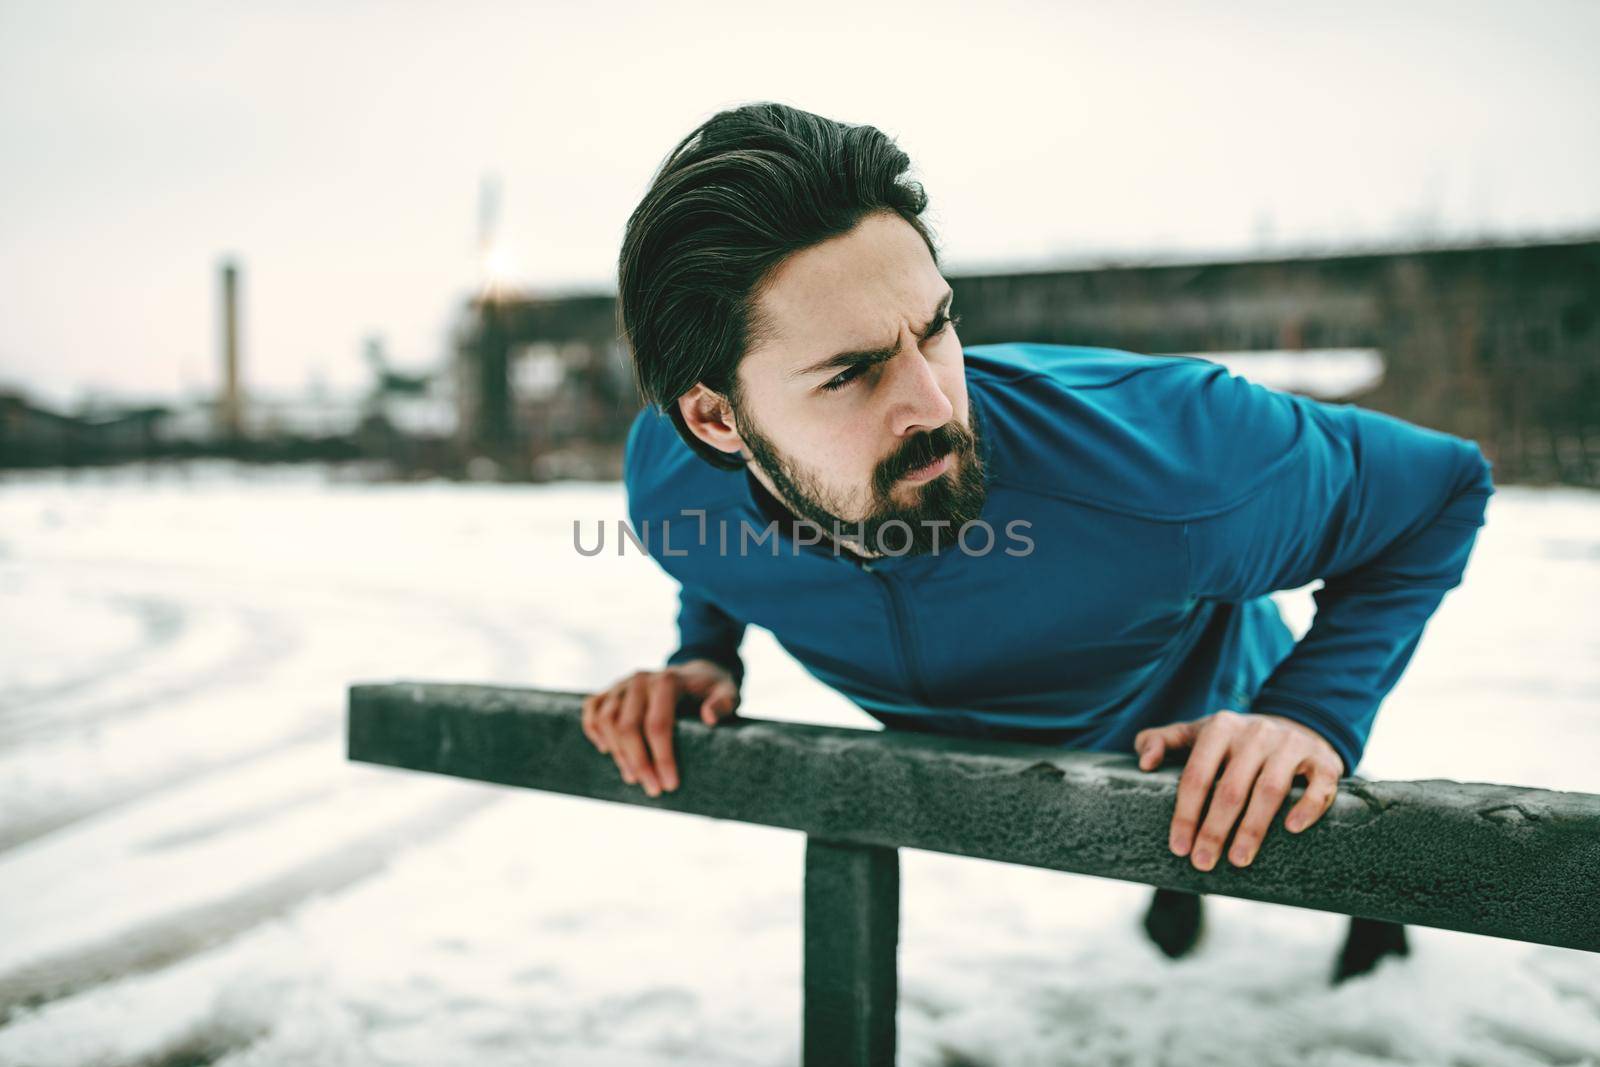 Young man athlete doing push ups and doing exercises during the winter training outside in while it snowing. Copy space.